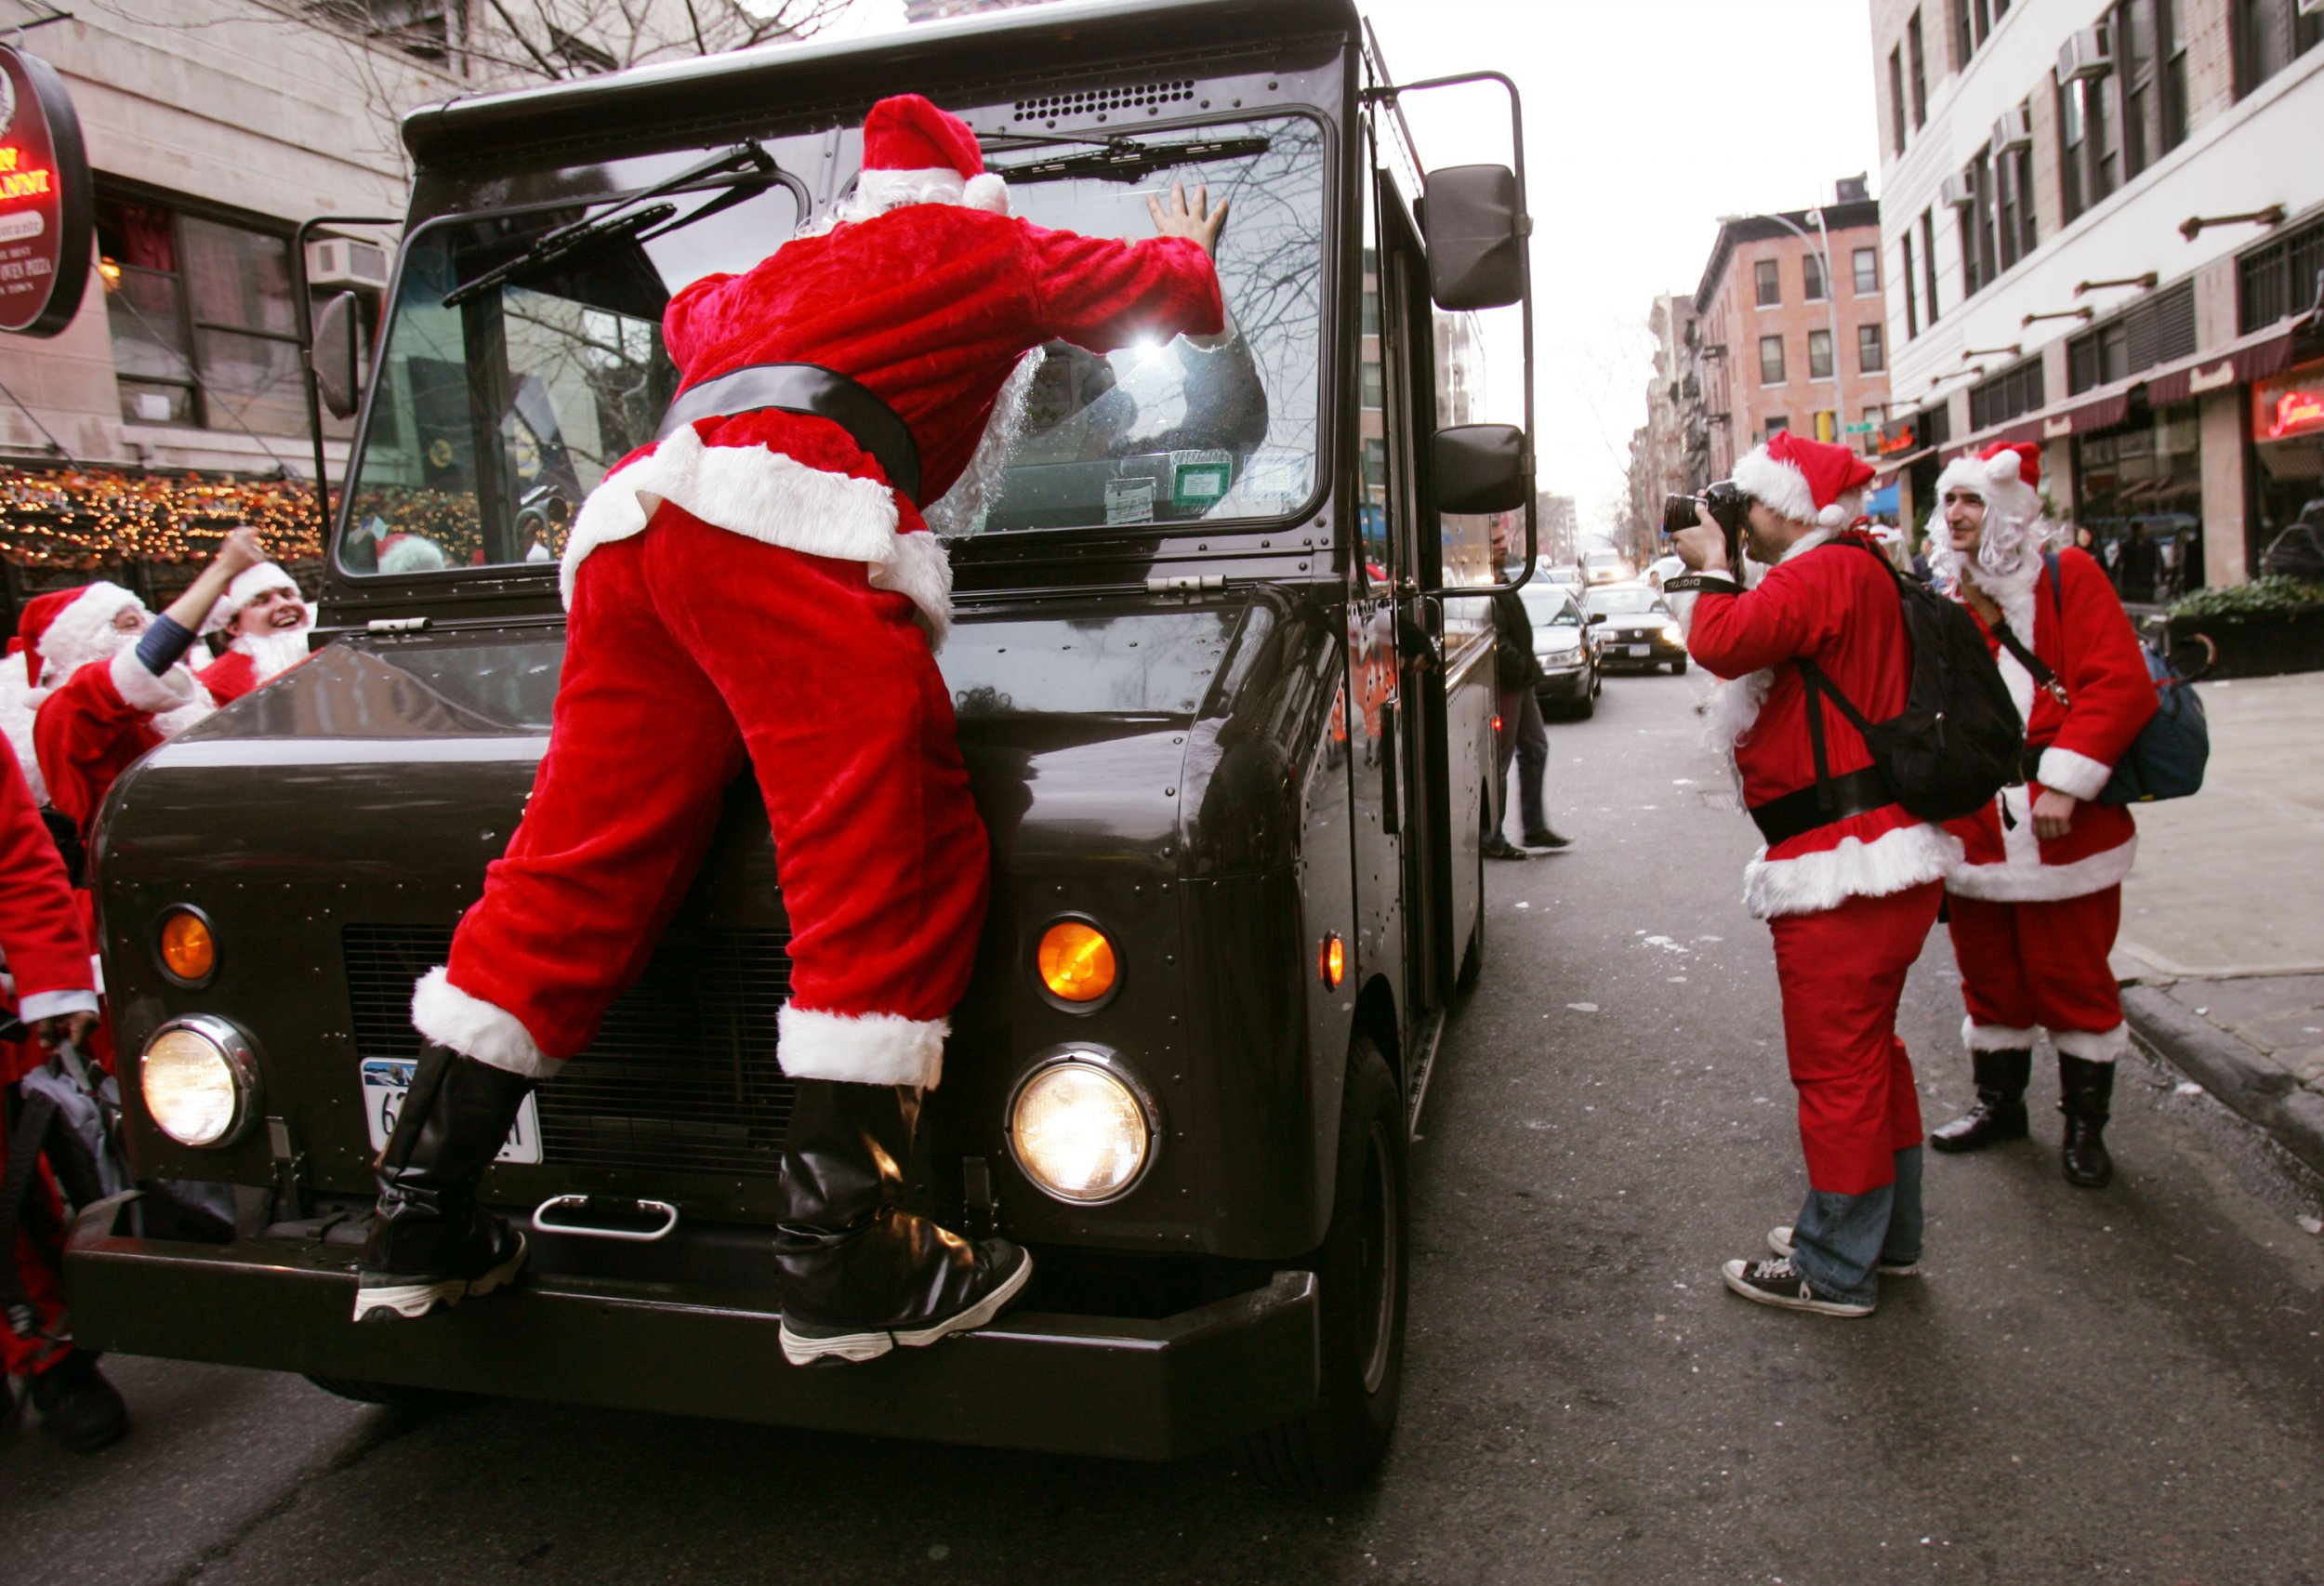 Santacon 2018 Outrageous Photos That Will Make You Thankful You Stayed Home